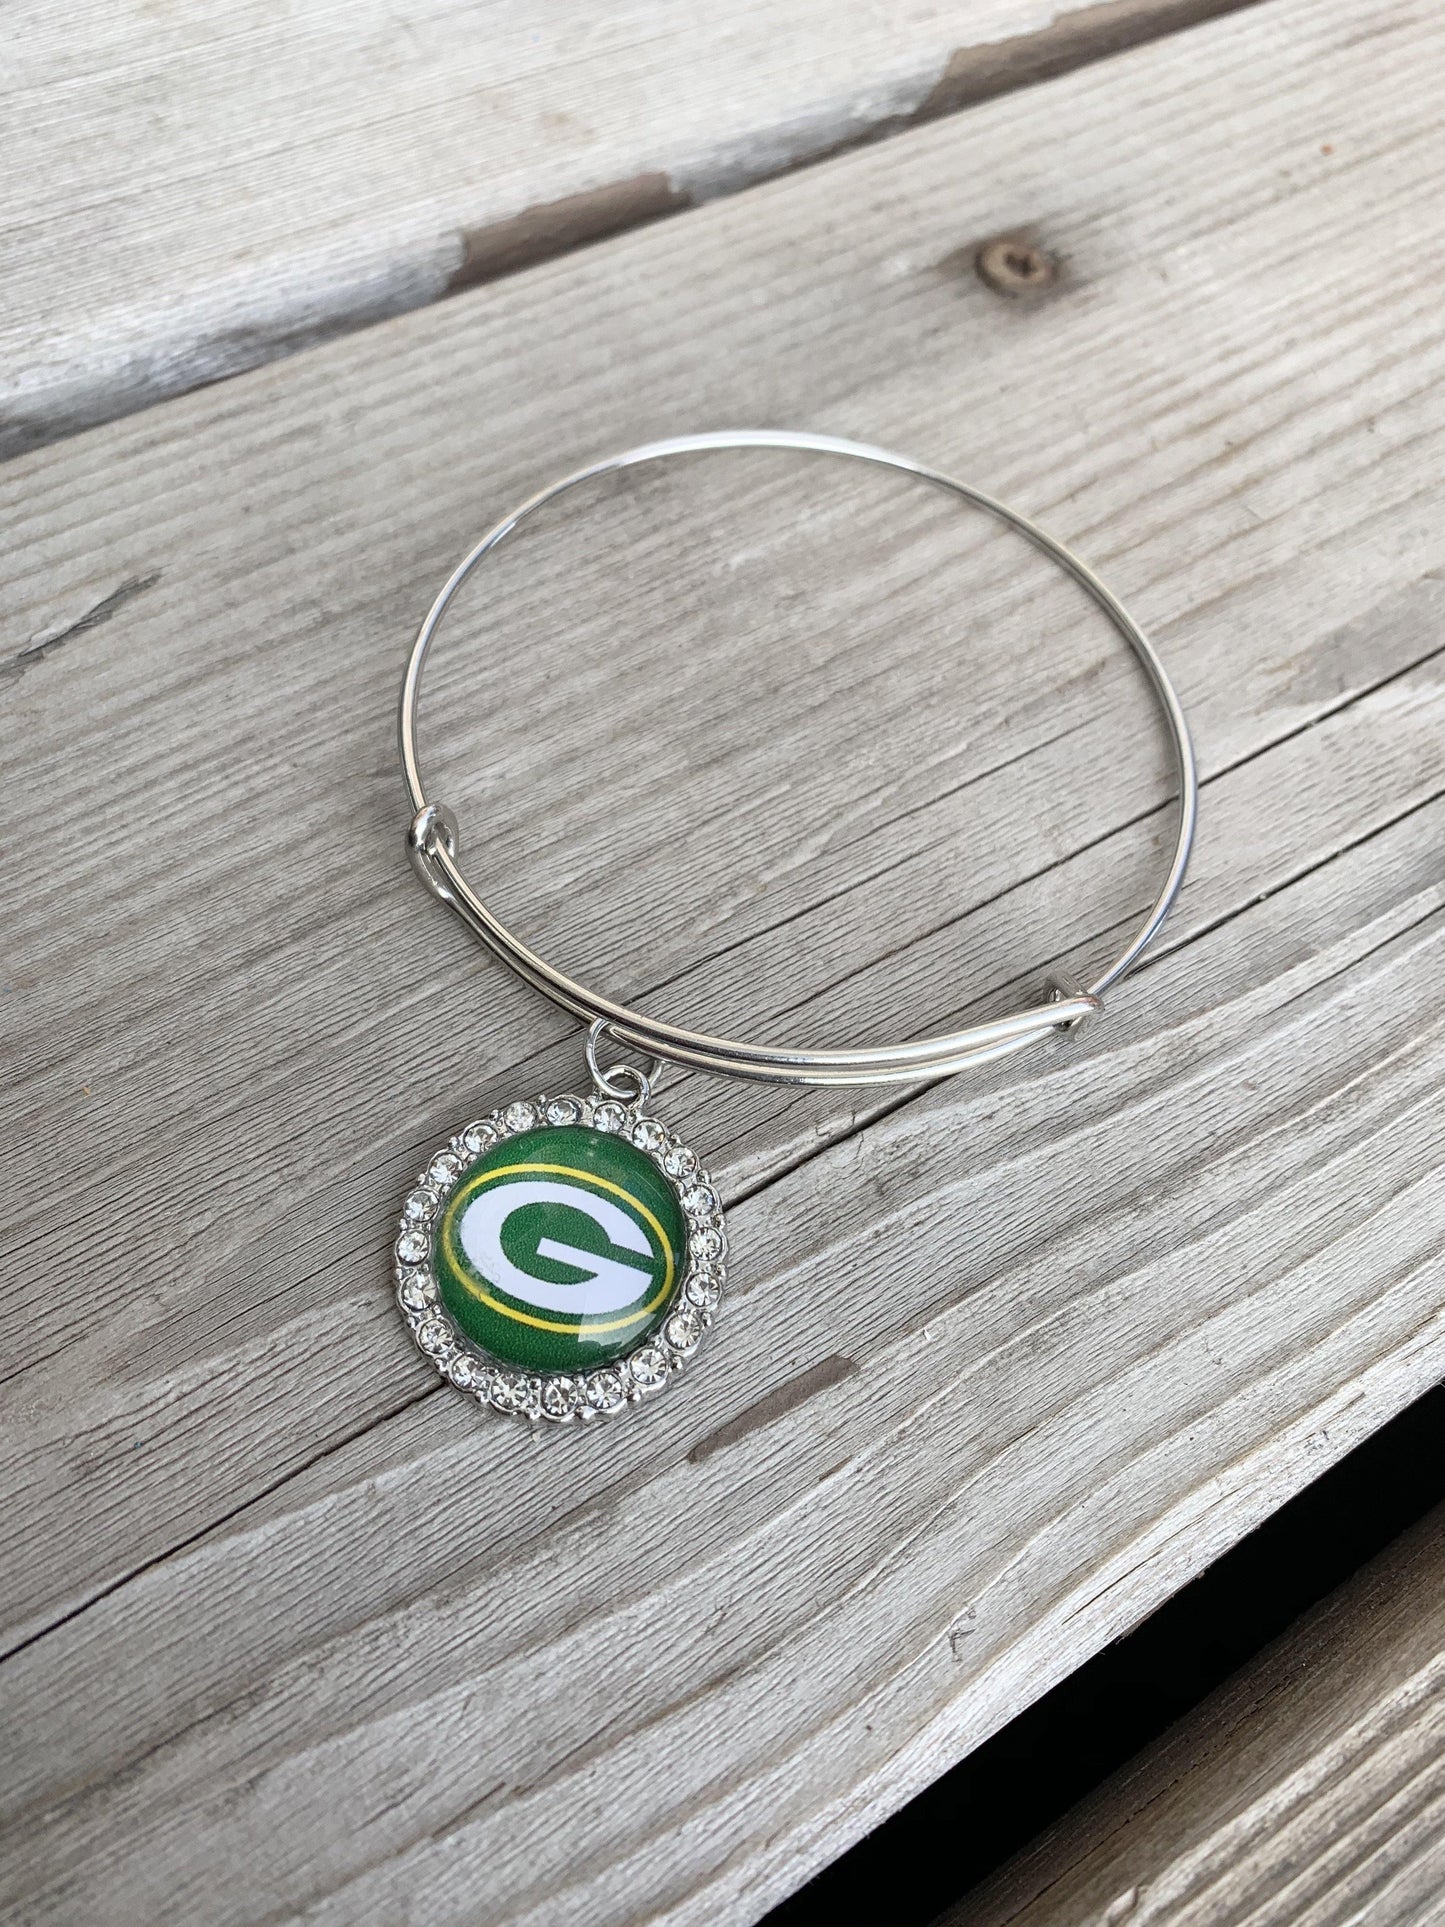 Green Bay Packers | Football jewelry | Necklaces | Earrings | Bracelets | Keychains - Stacy's Pink Martini Boutique